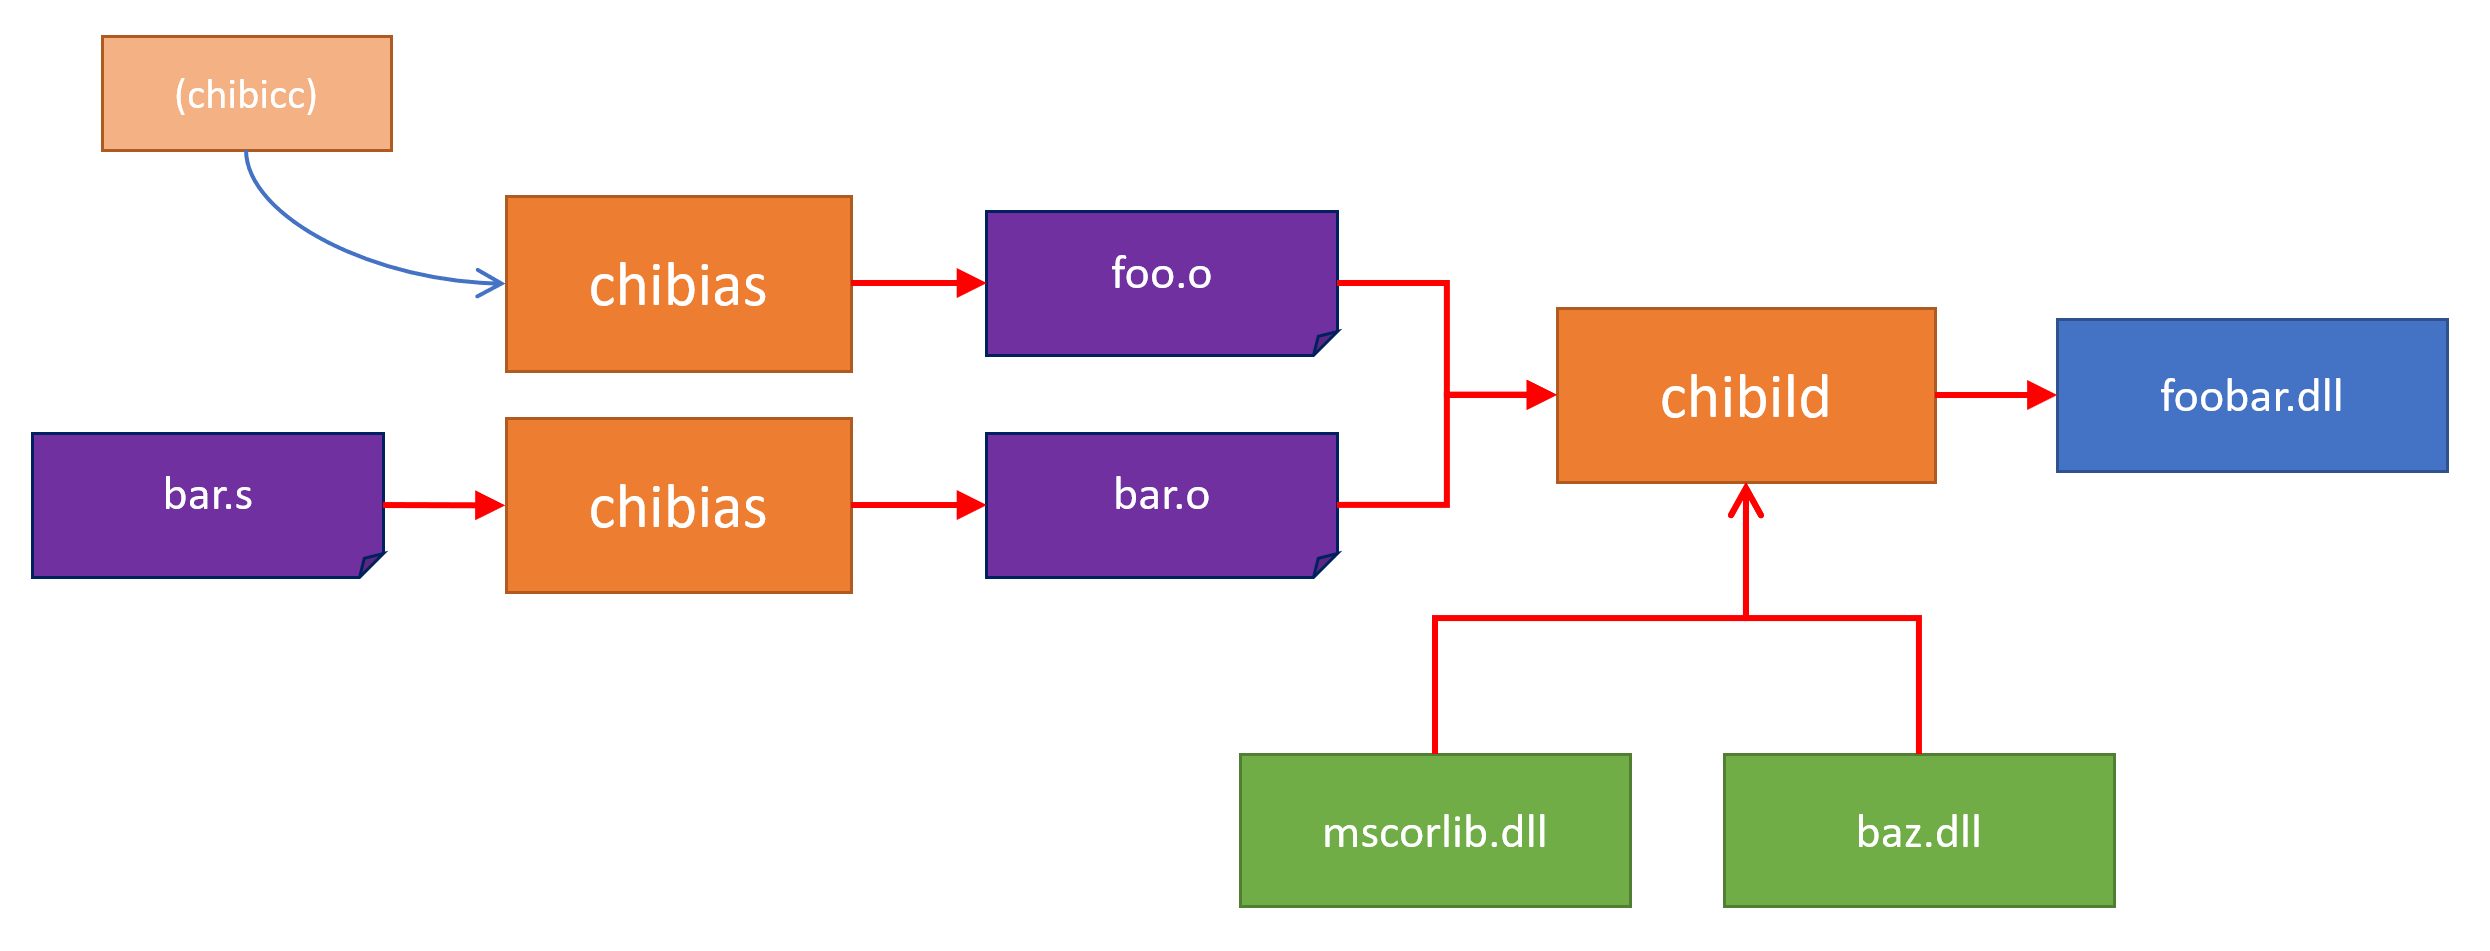 chibicc-toolchain overview